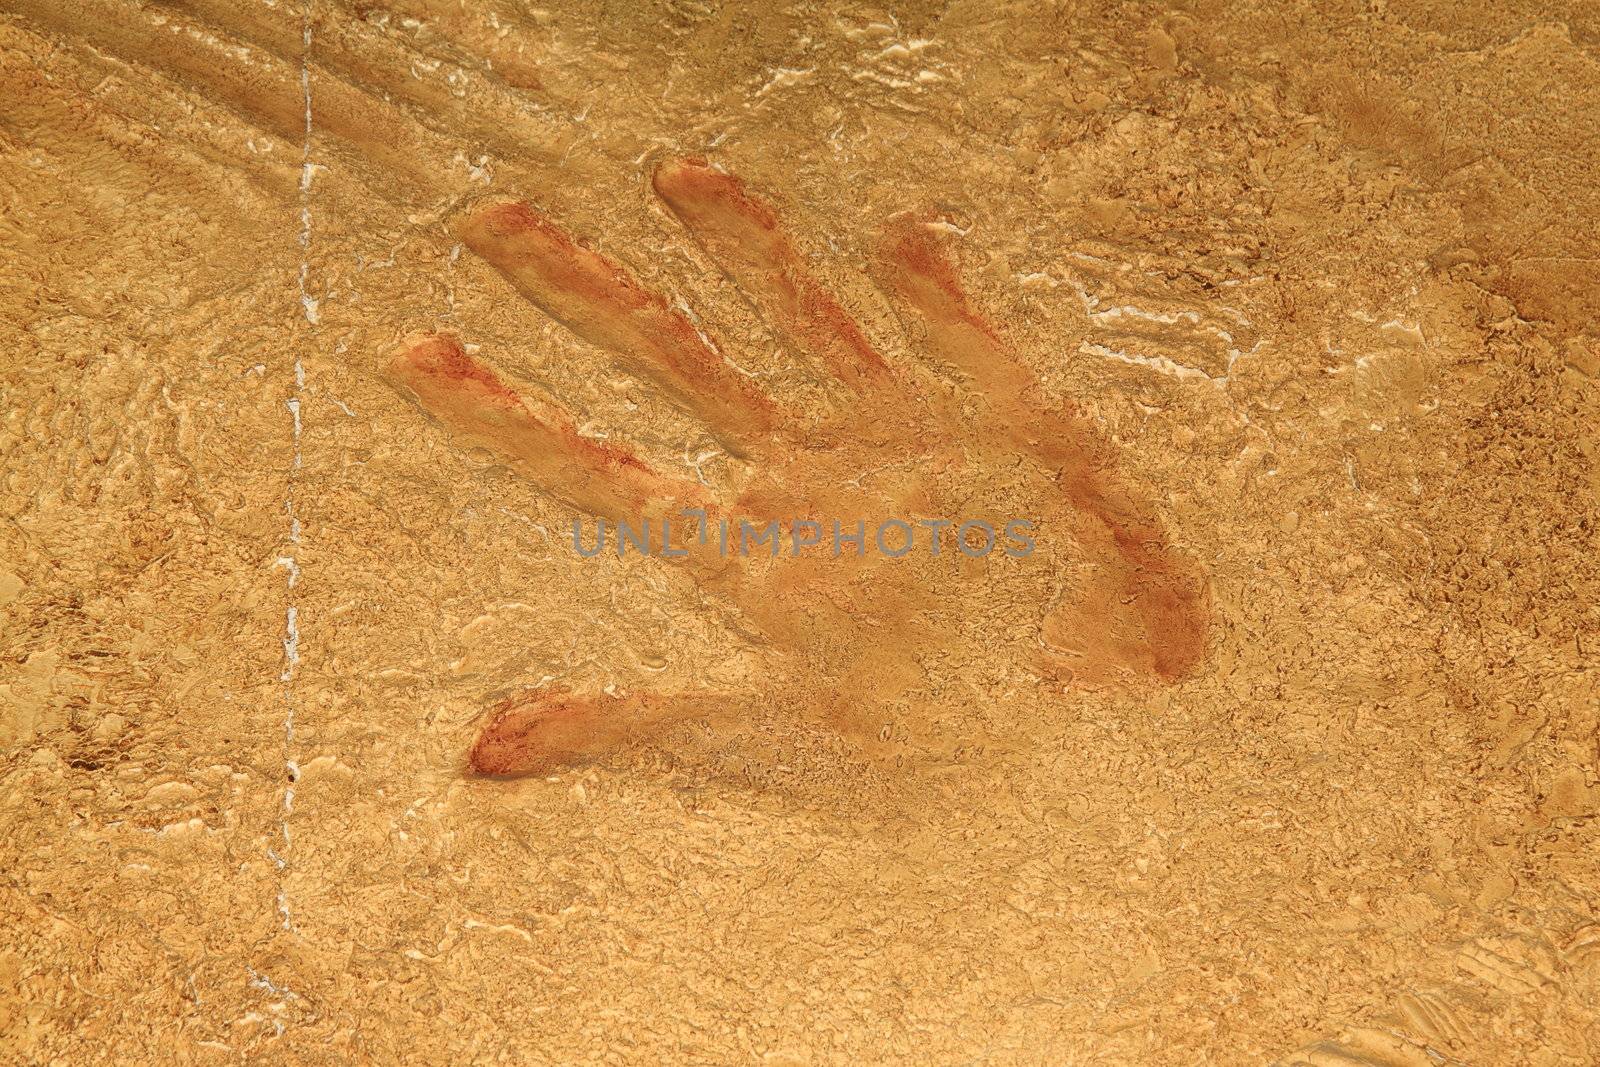 Red hand print on stone background or site